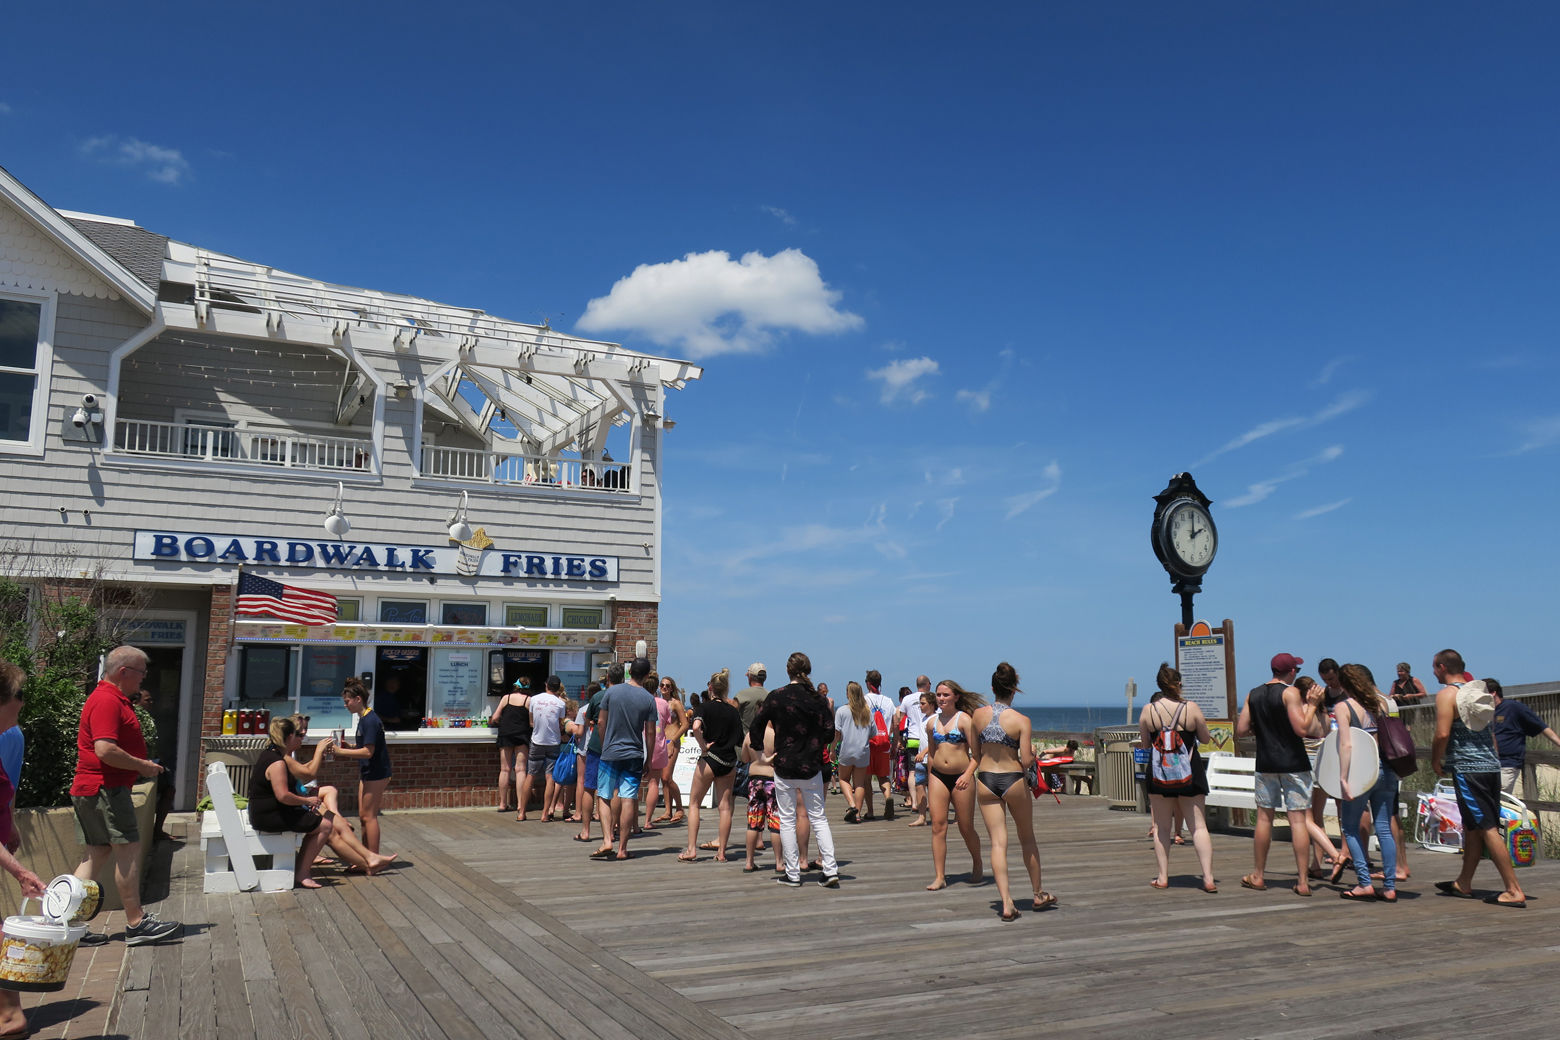 Bethany Beach boardwalk and Boardwalk Fries are shown